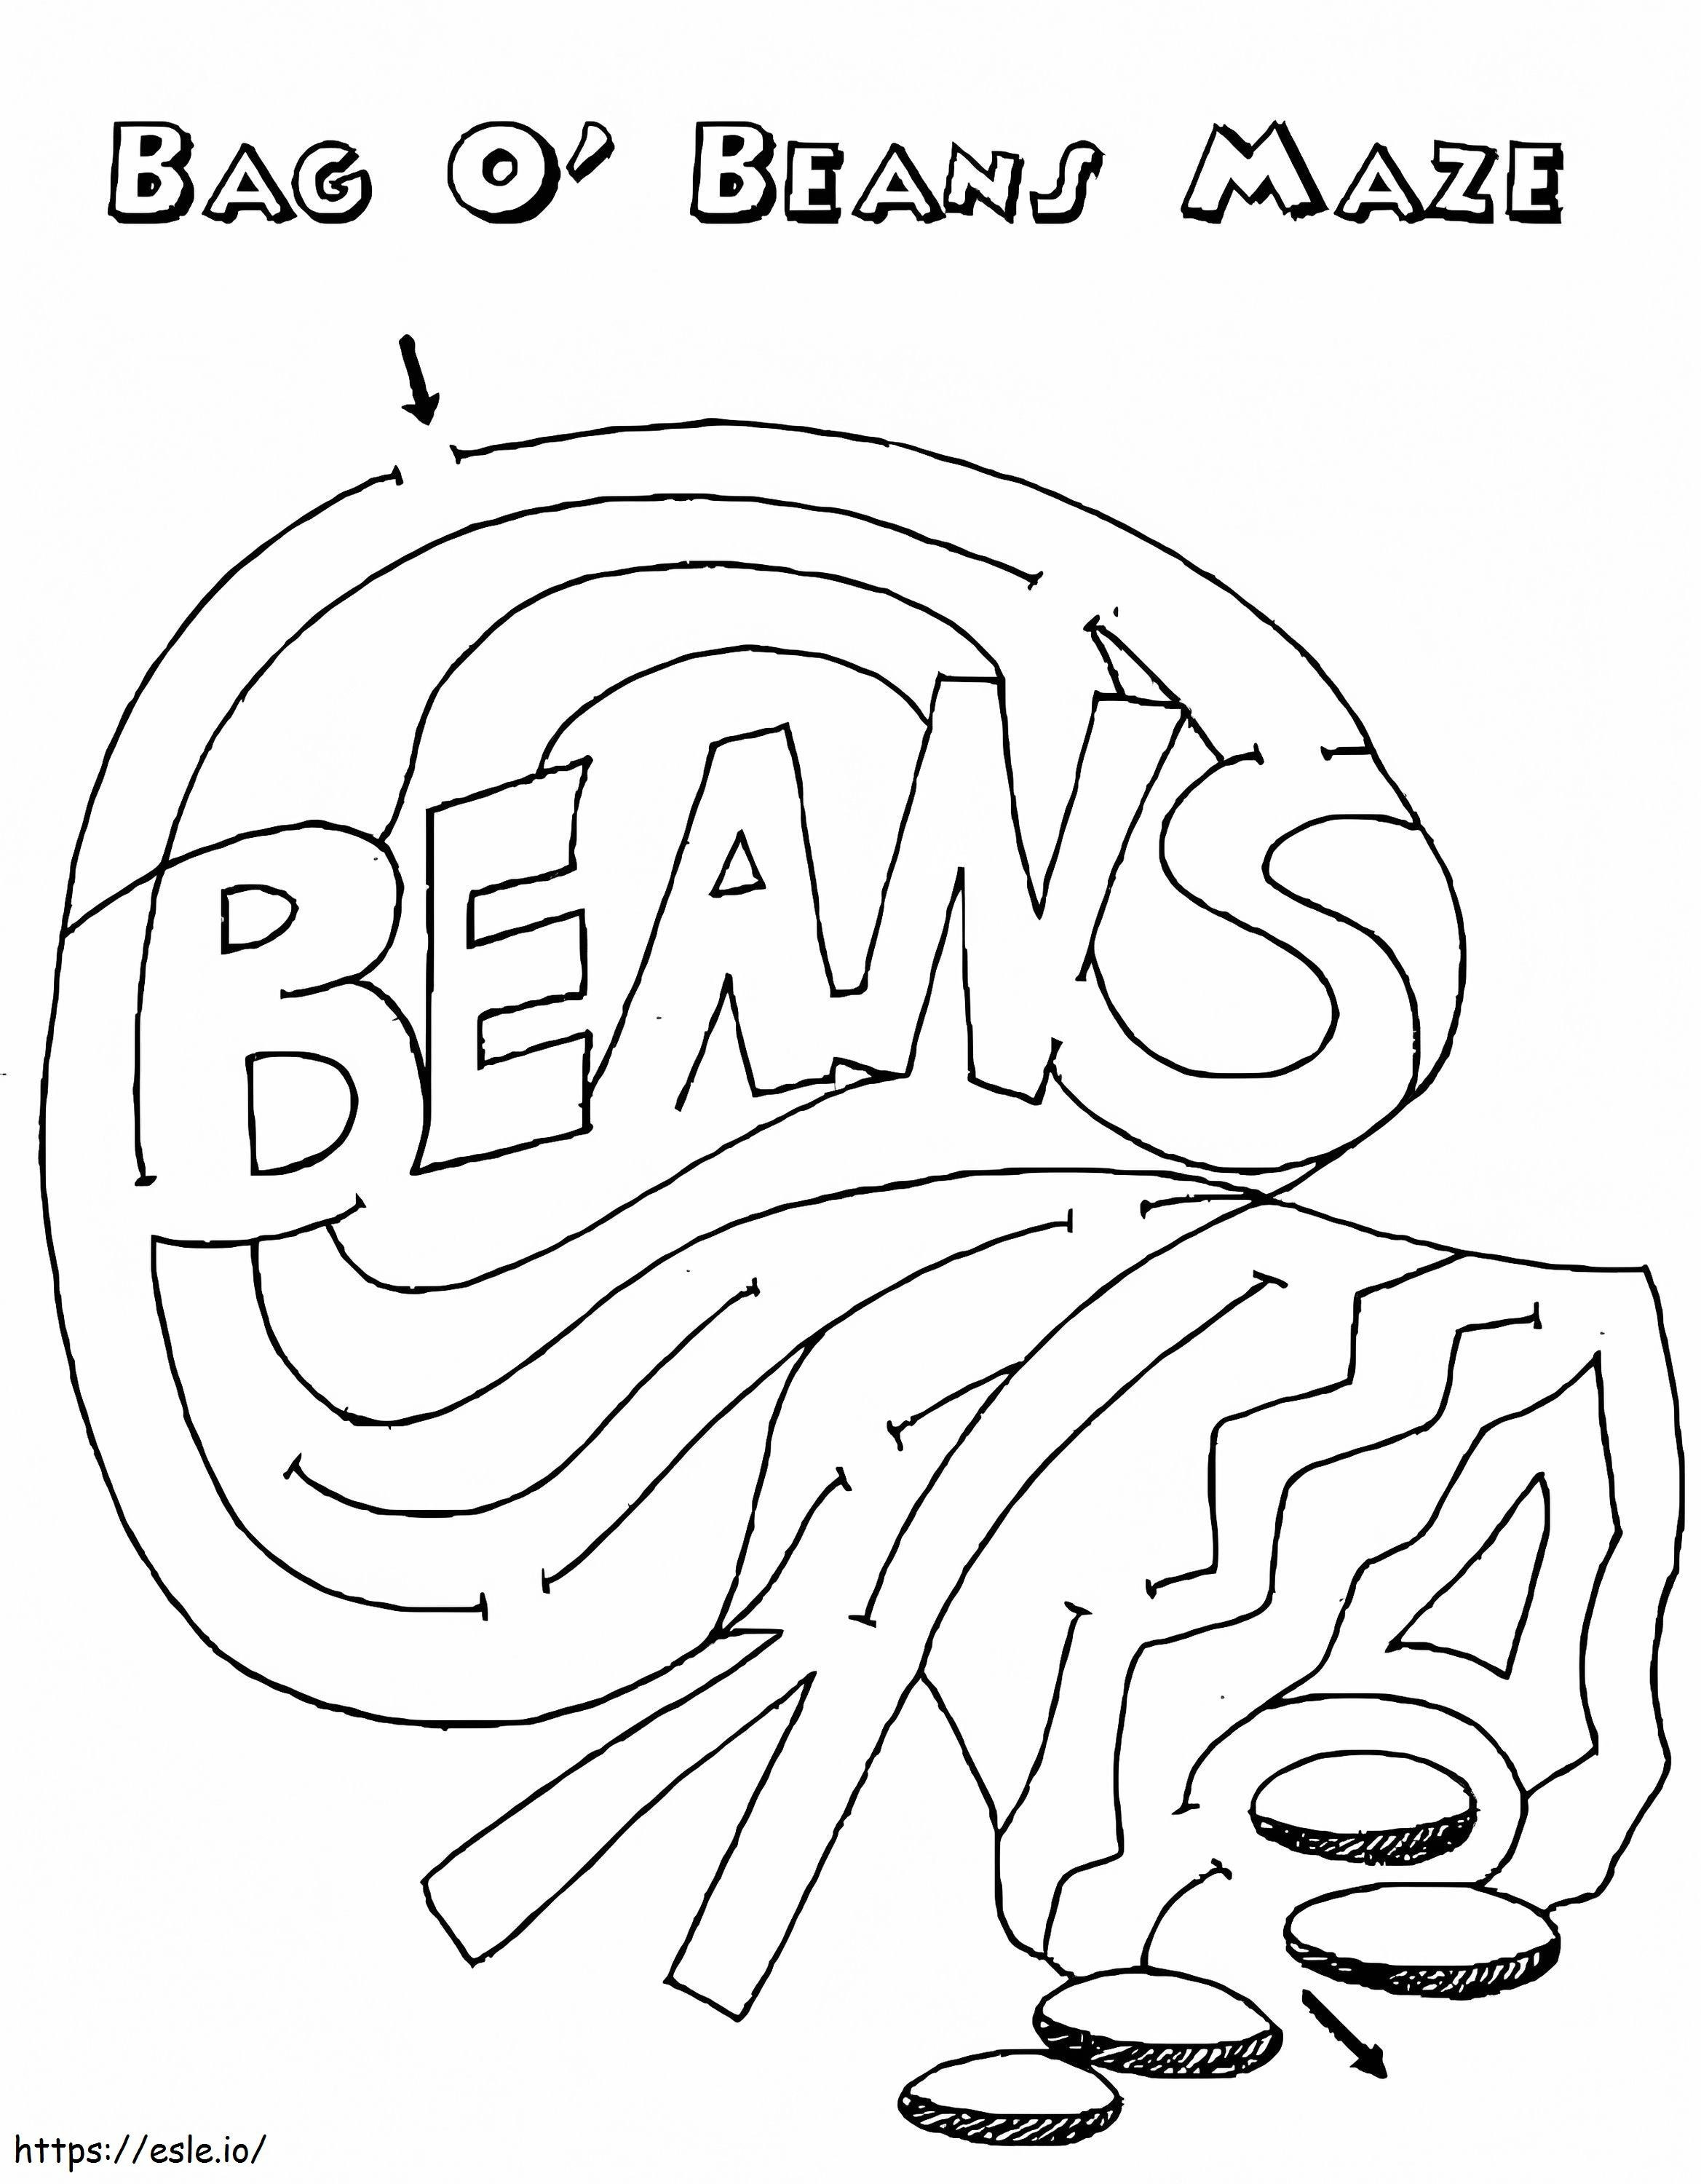 Beans Maze coloring page